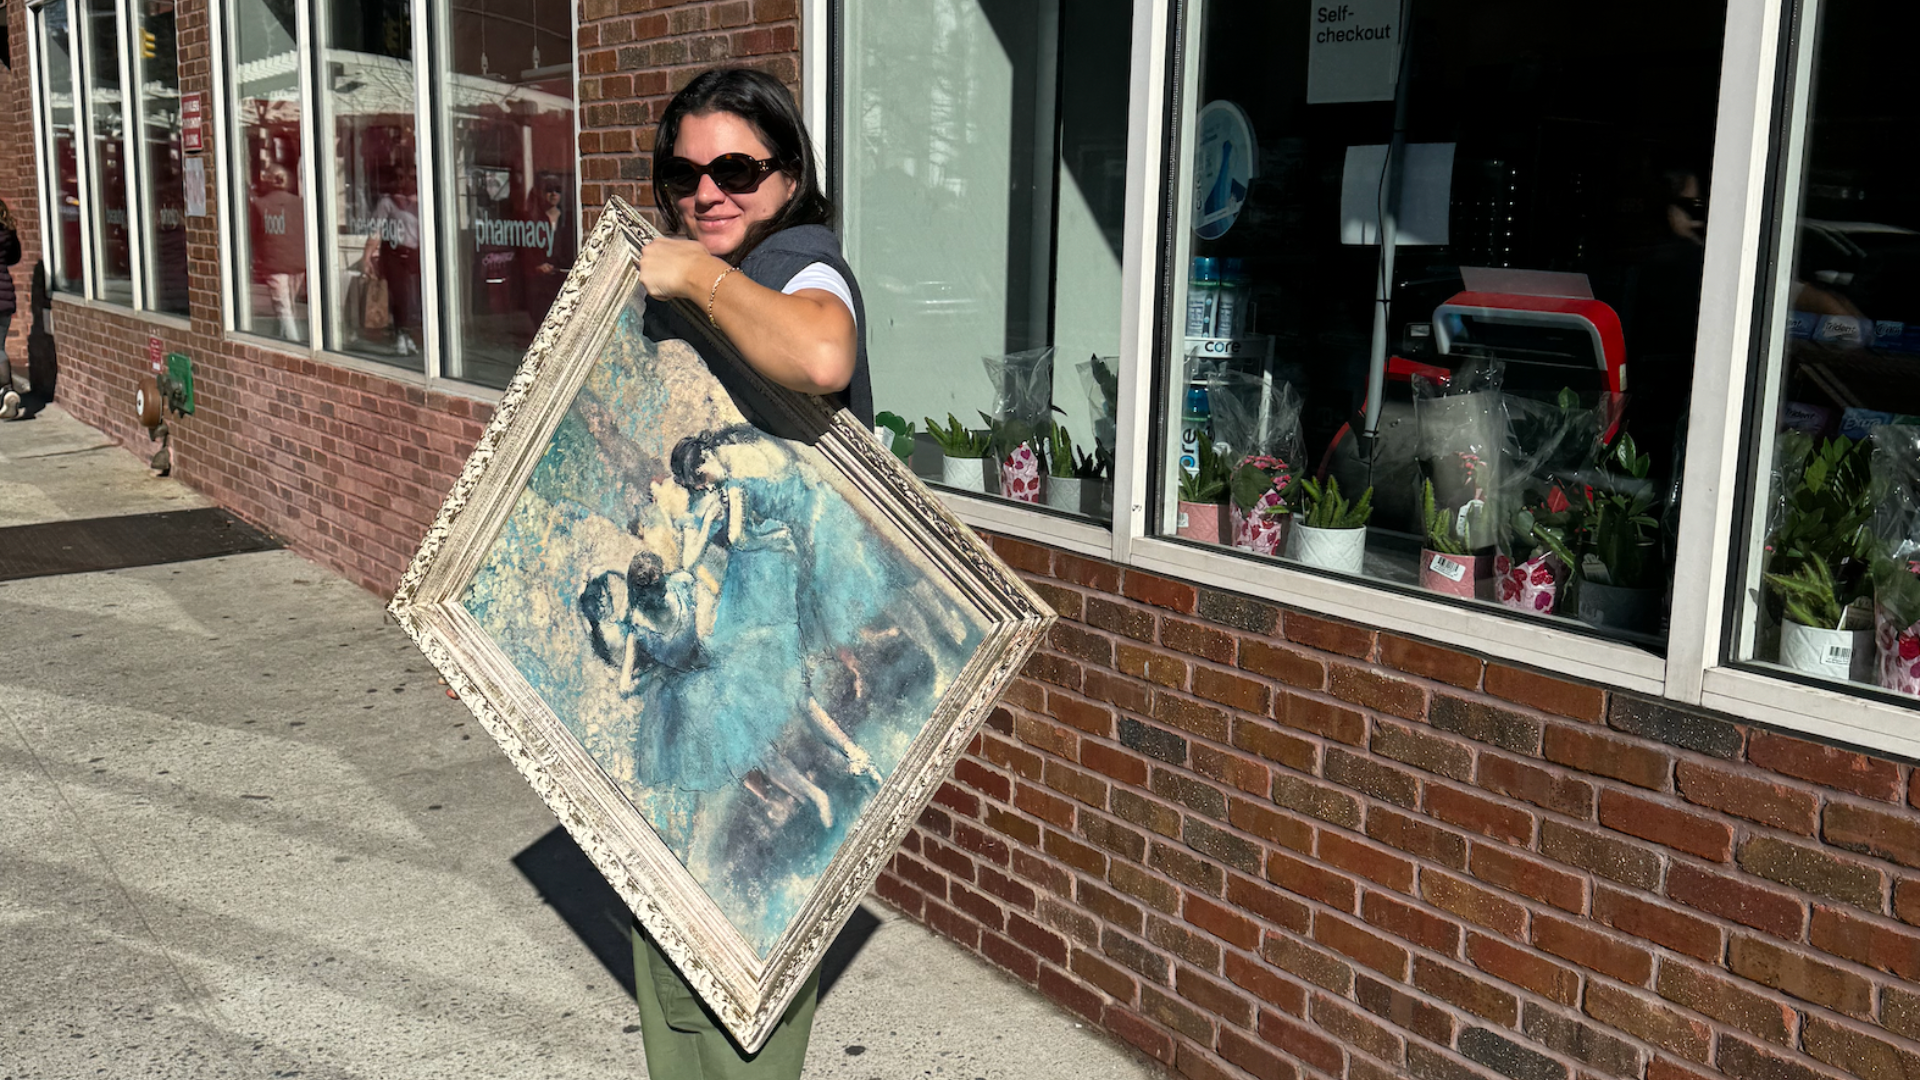 person carrying a large framed painting on the sidewalk